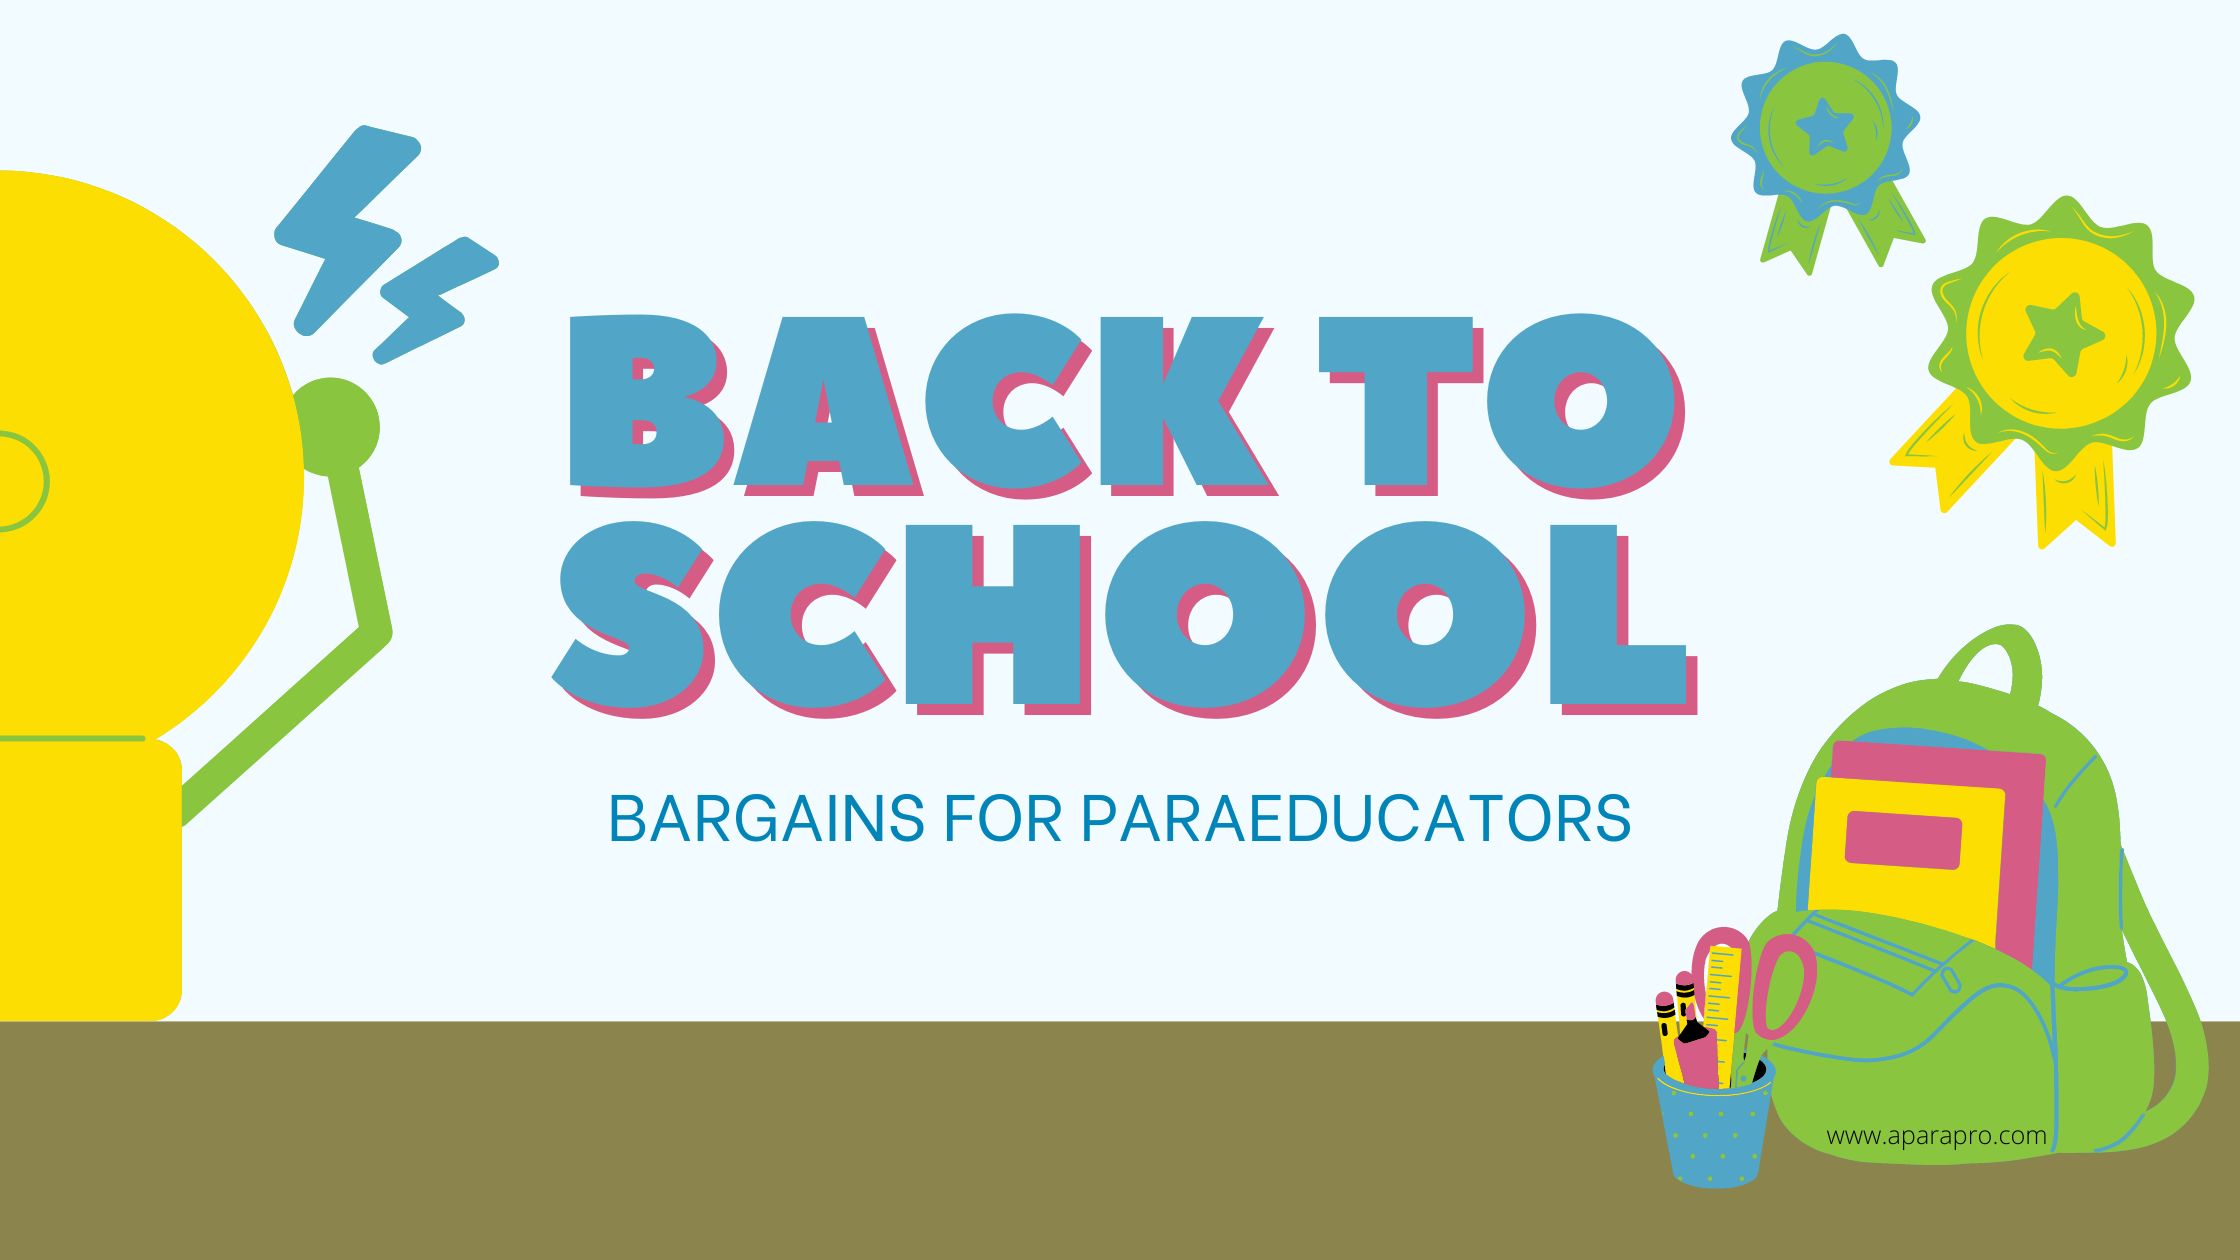 back-to-school bargains for paras by a para pro.